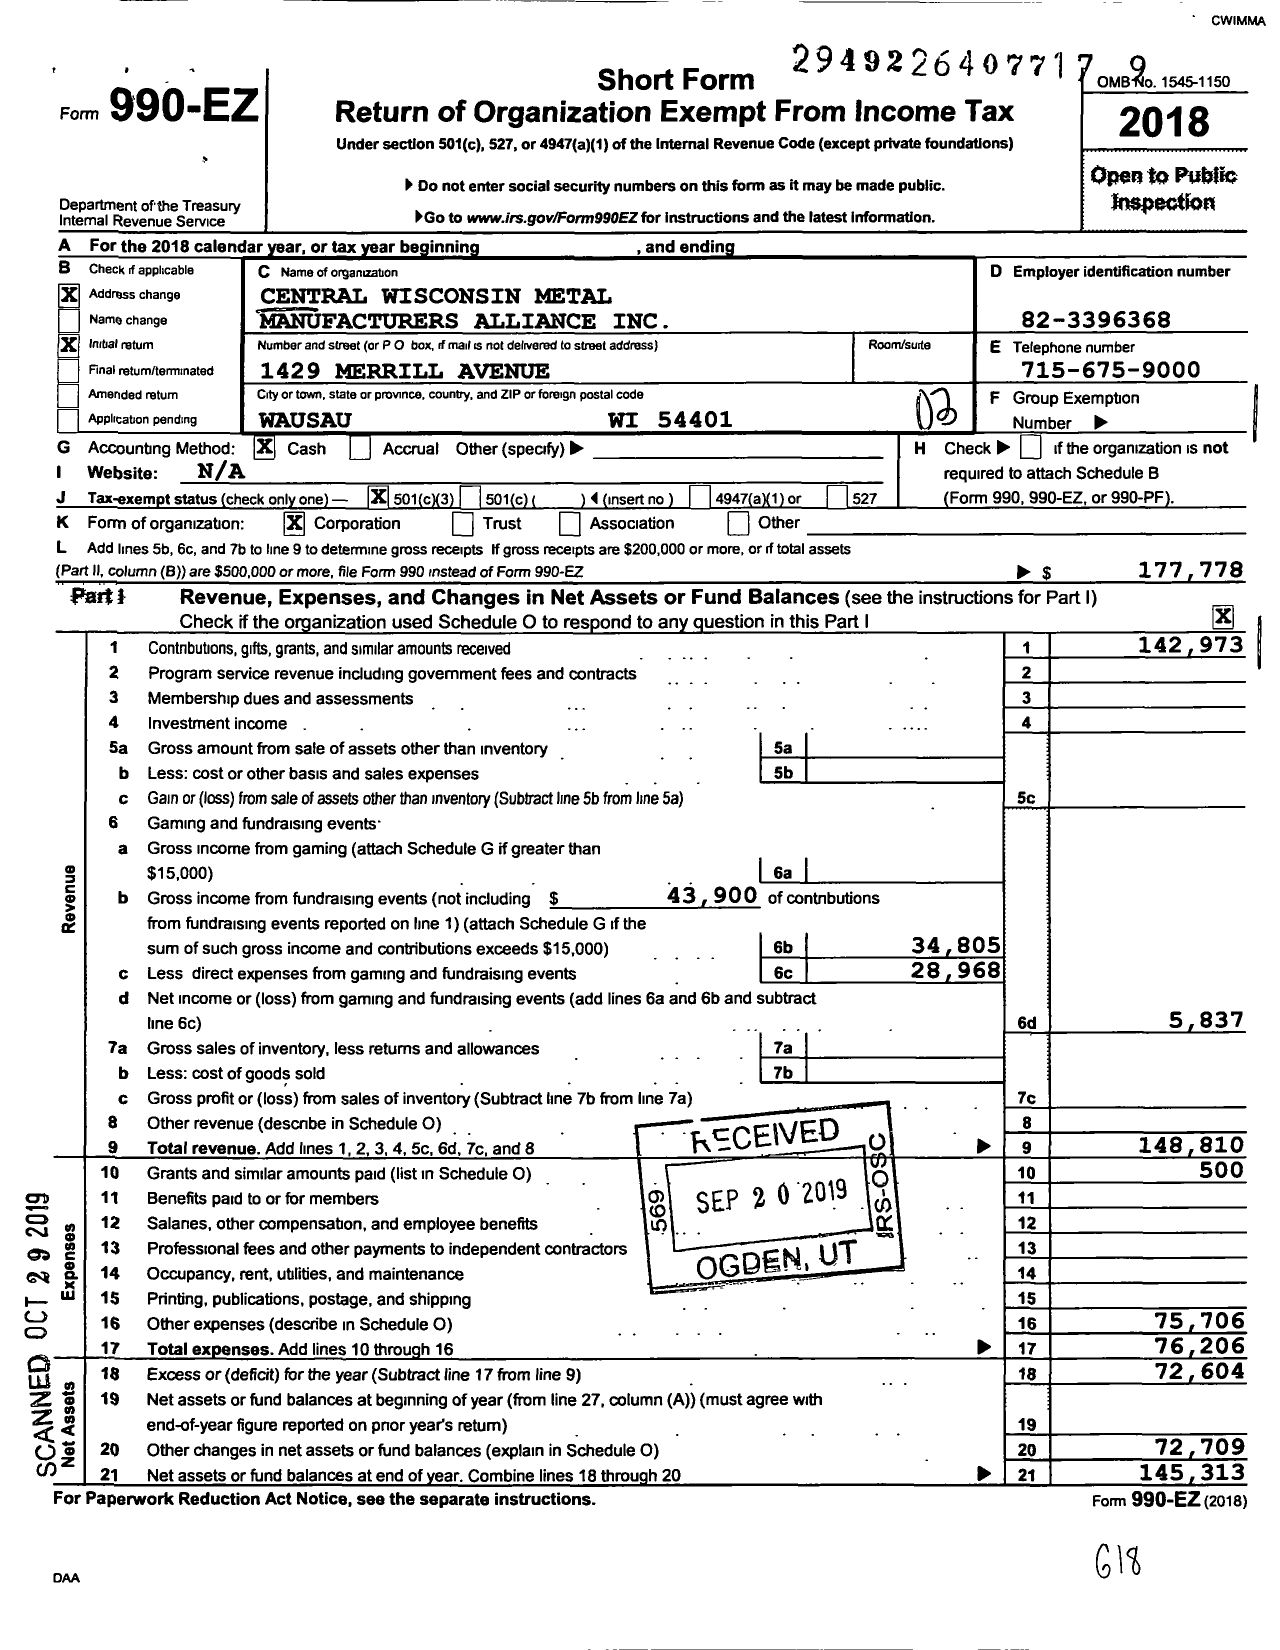 Image of first page of 2018 Form 990EZ for Central Wisconsin Manufacturing Alliance